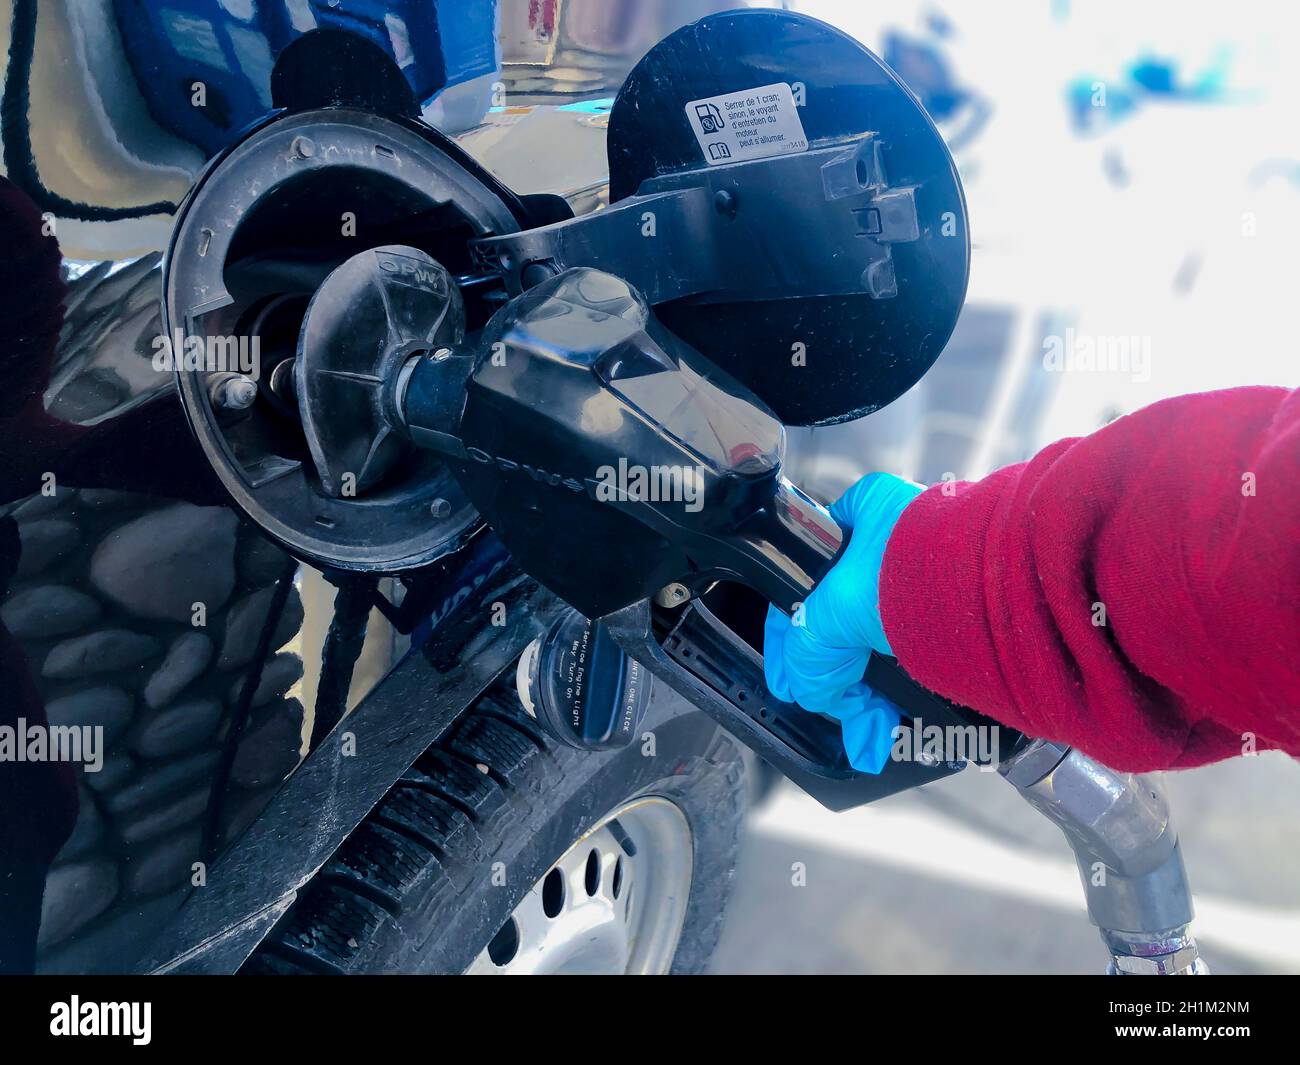 Calgary, Alberta, Canada. Nov 15, 2020. A person wearing single use gloves, pumping gasoline to a chevrolet SUV vehicle during the pandemic covid-19 c Stock Photo